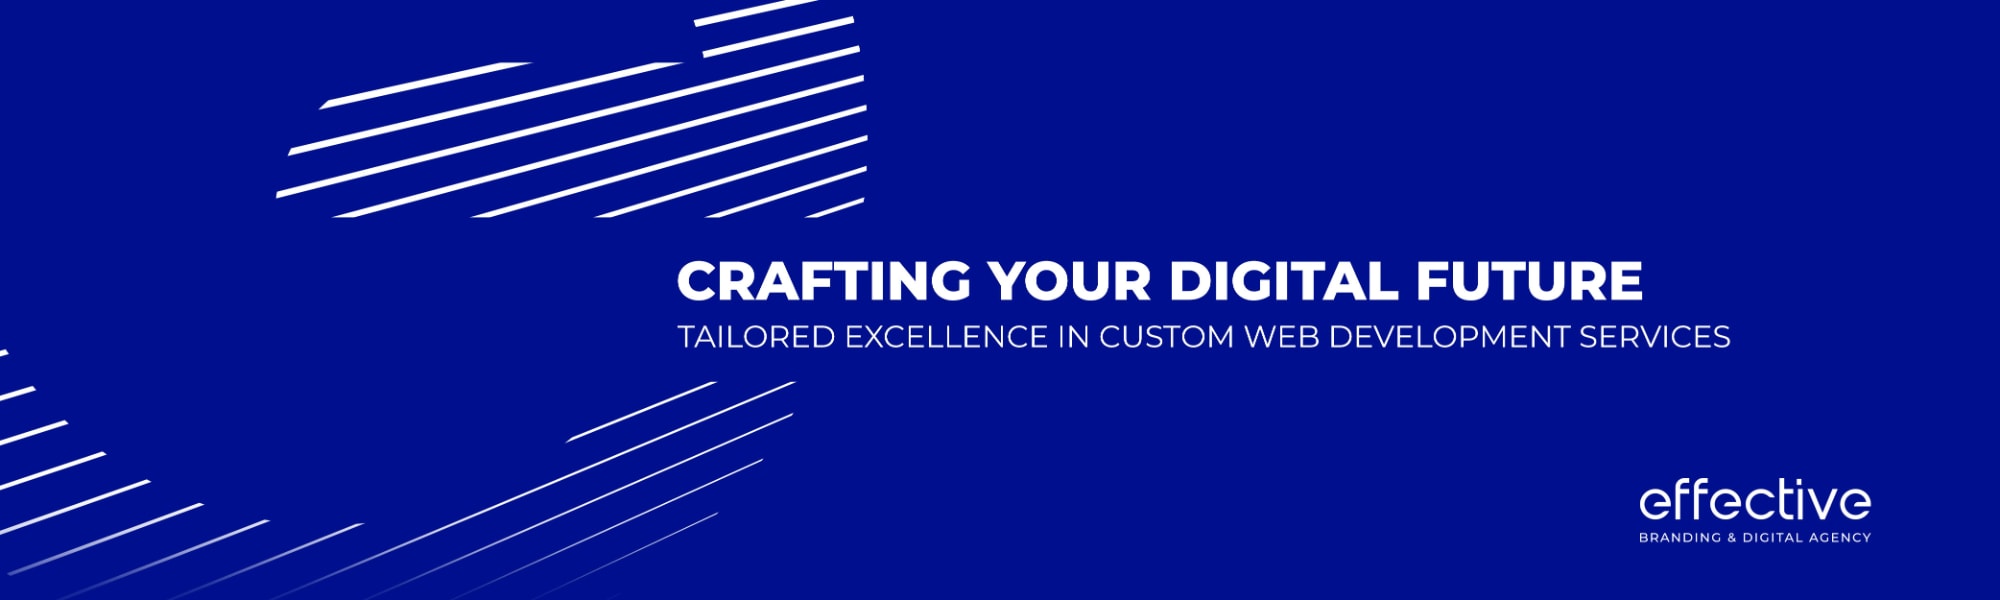 Crafting Your Digital Future Tailored Excellence in Custom Web Development Services